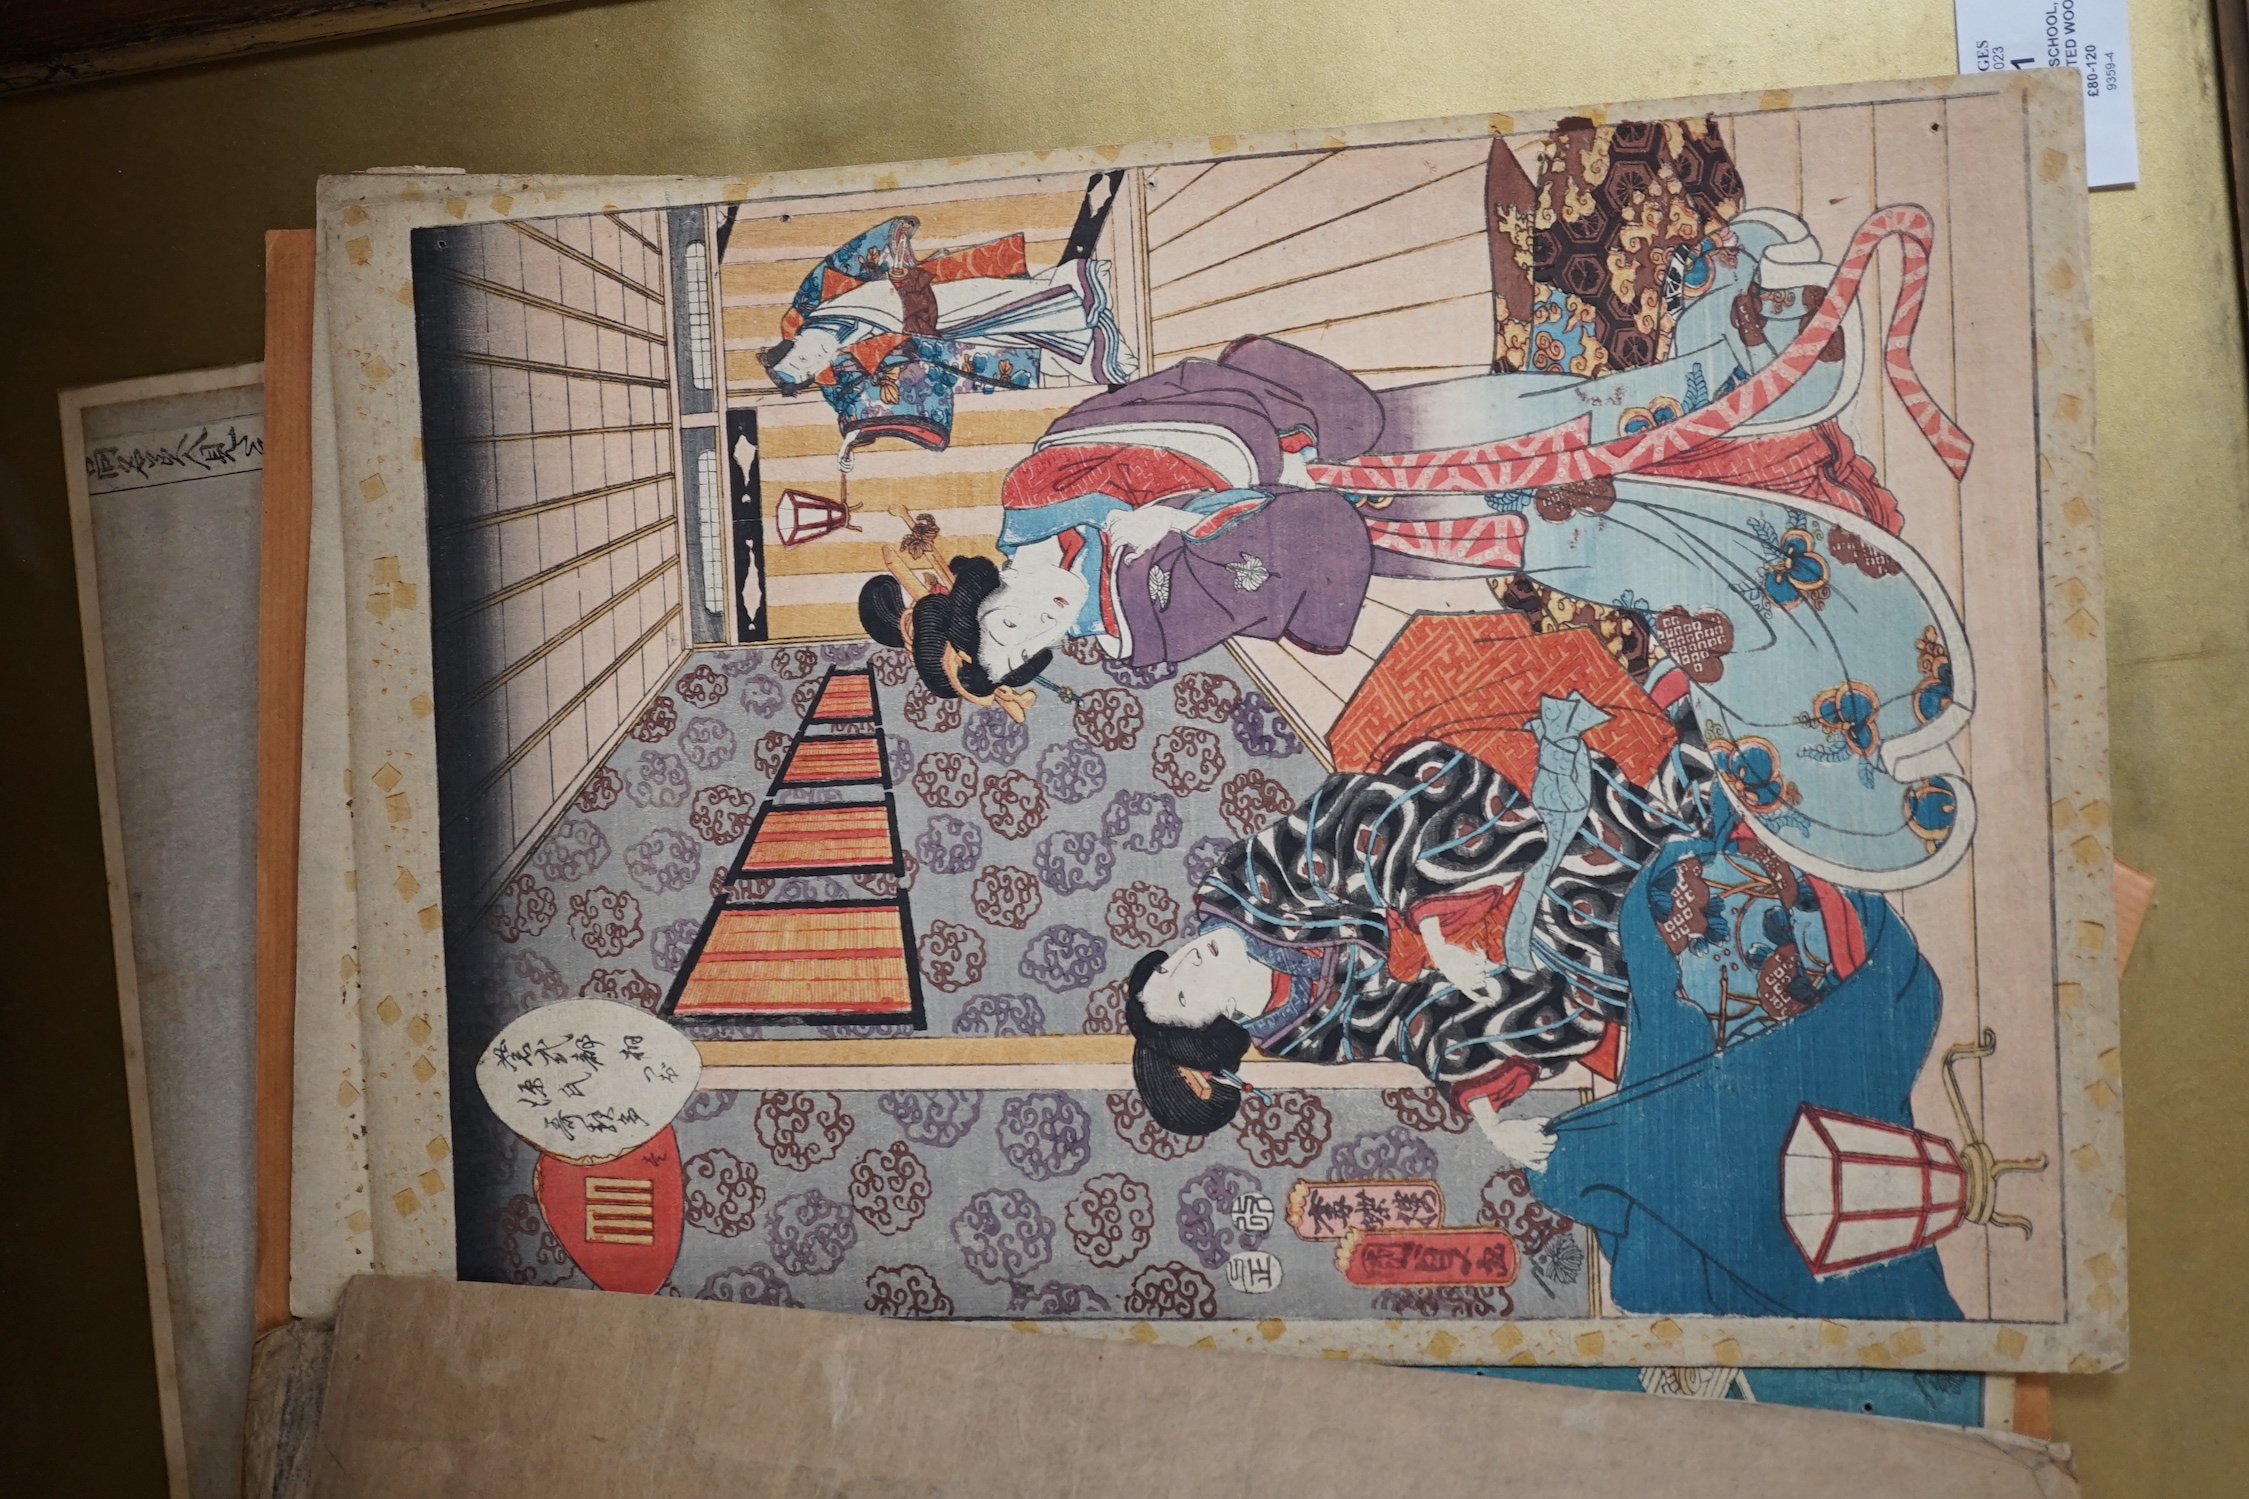 Japanese School, four assorted woodblock prints including Koryusai and Hiroshige, largest 39 x 25cm, four unframed